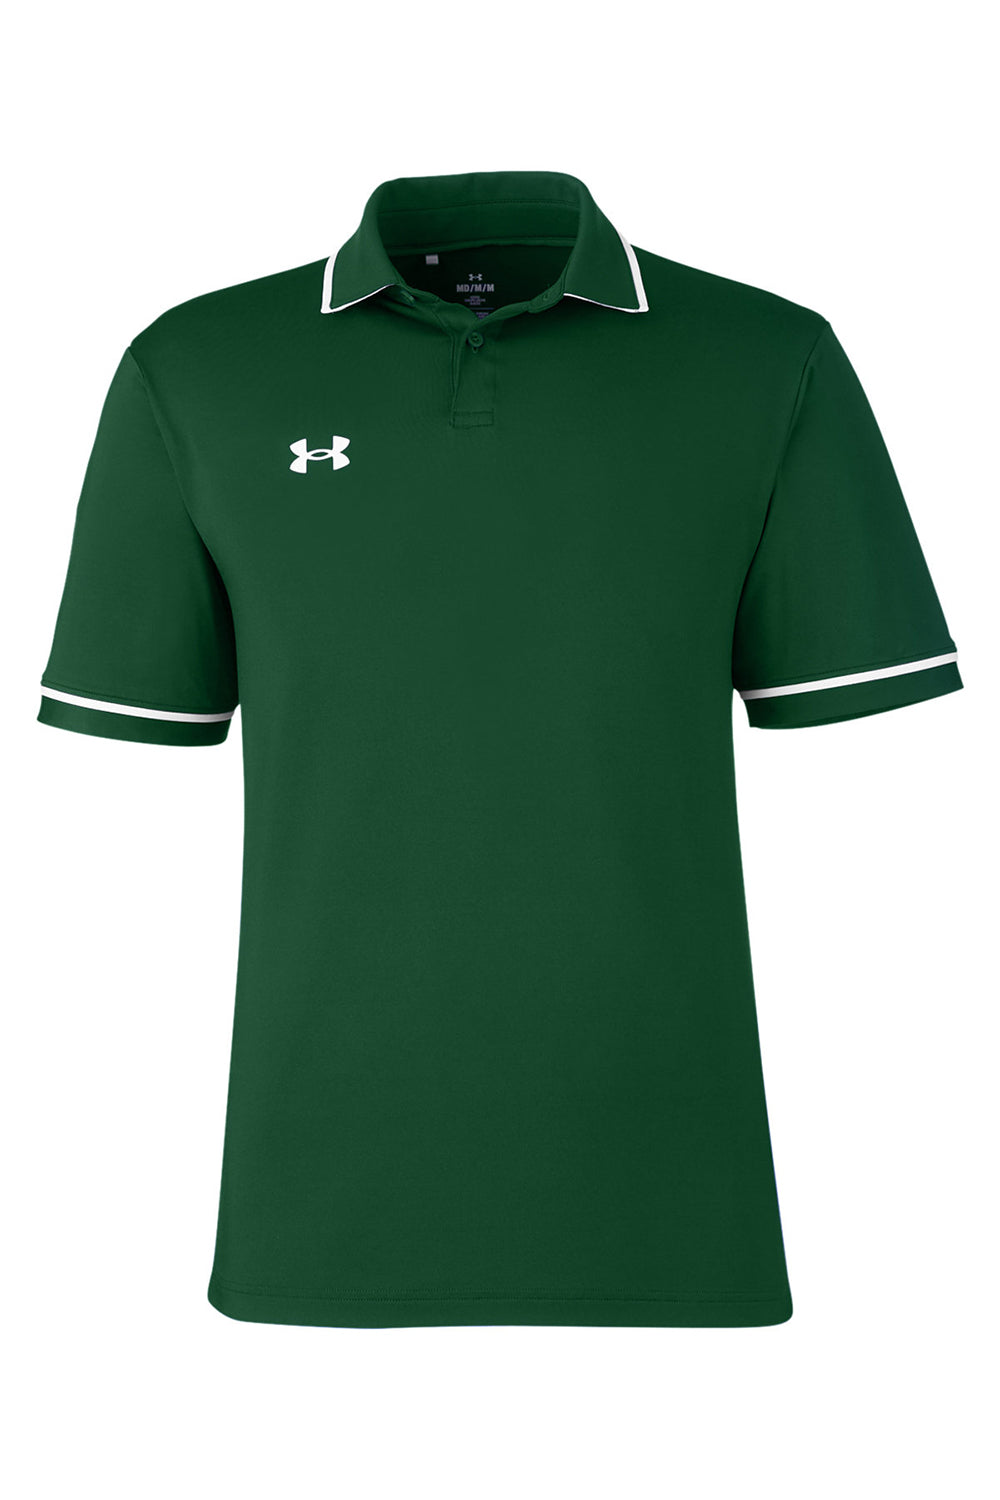 Under Armour 1376904 Mens Teams Performance Moisture Wicking Short Sleeve Polo Shirt Forest Green Flat Front